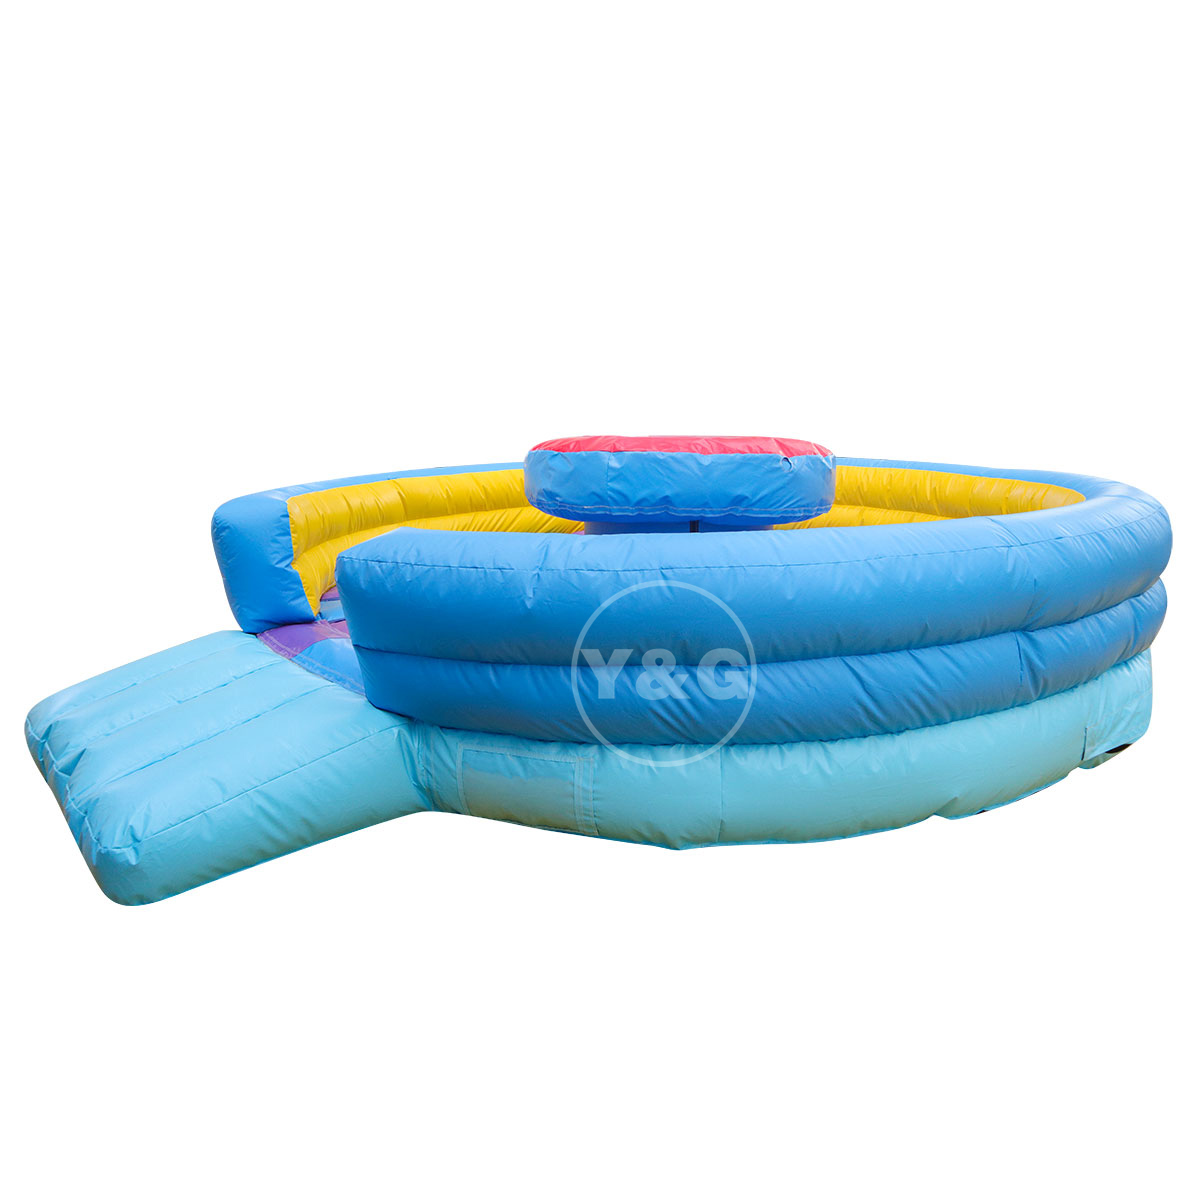 Outdoor inflatable sports areaYGG109